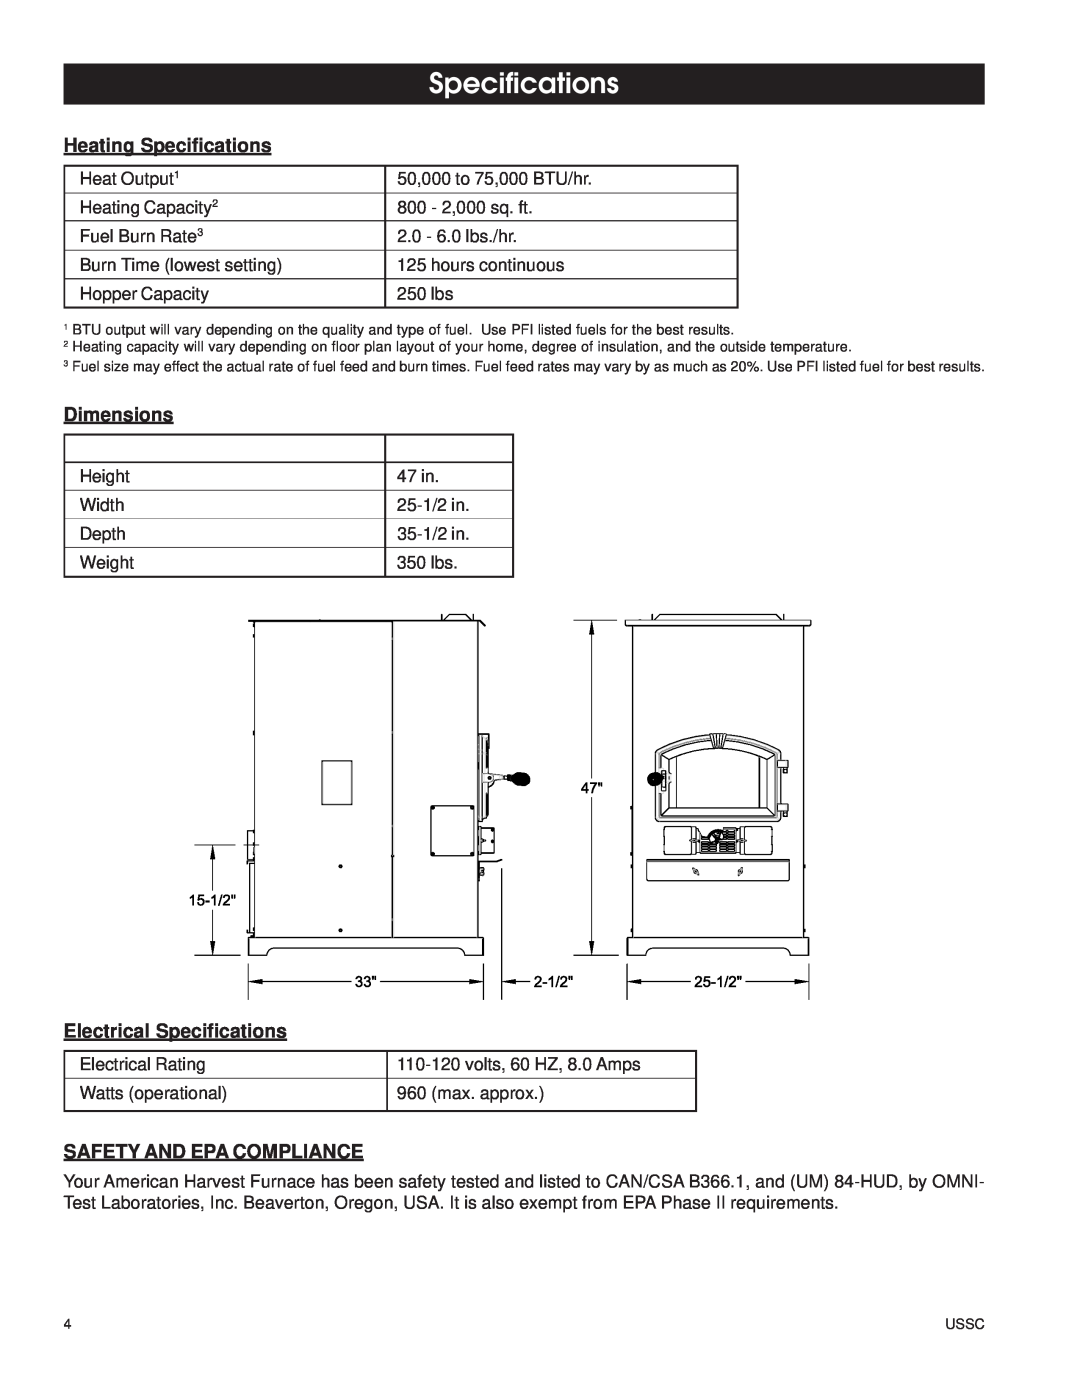 United States Stove 6110 Heating Specifications, Dimensions, Electrical Specifications, Safety And Epa Compliance 